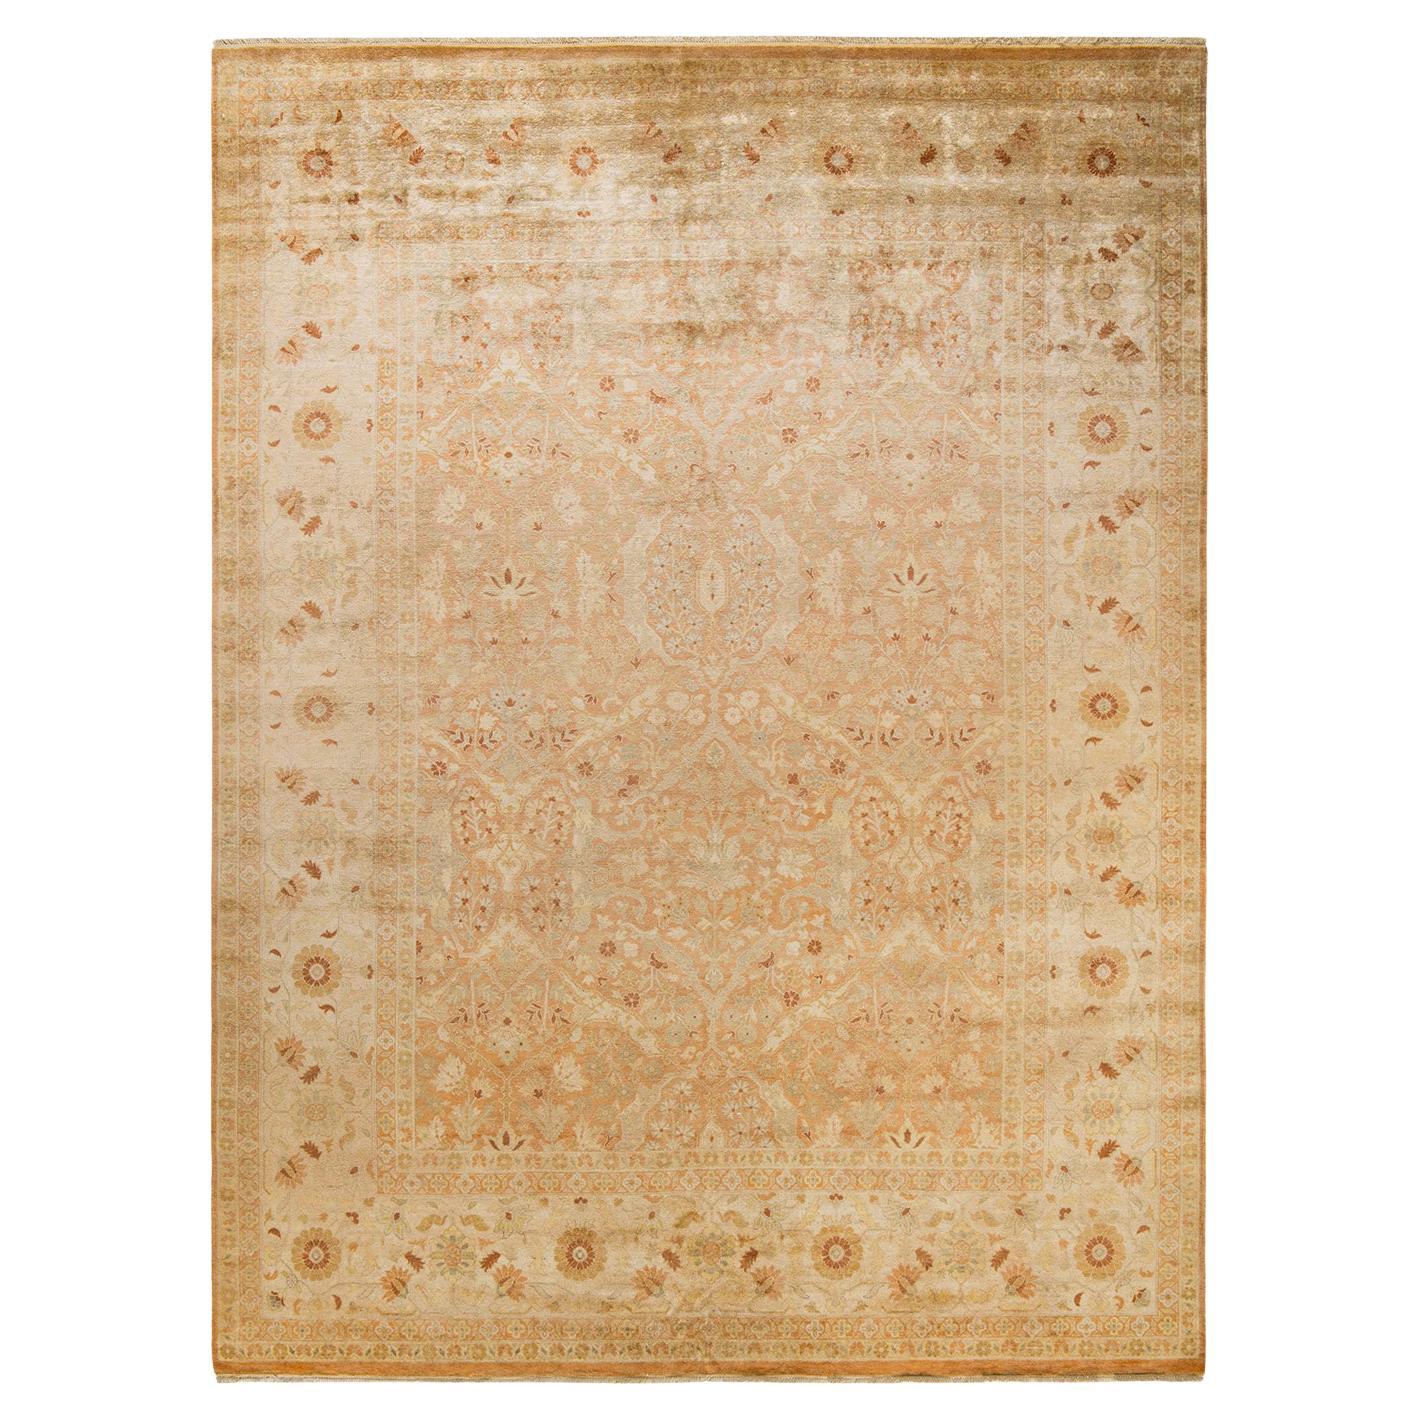 One-of-a-kind Hand Made Contemporary Eclectic Brown Area Rug